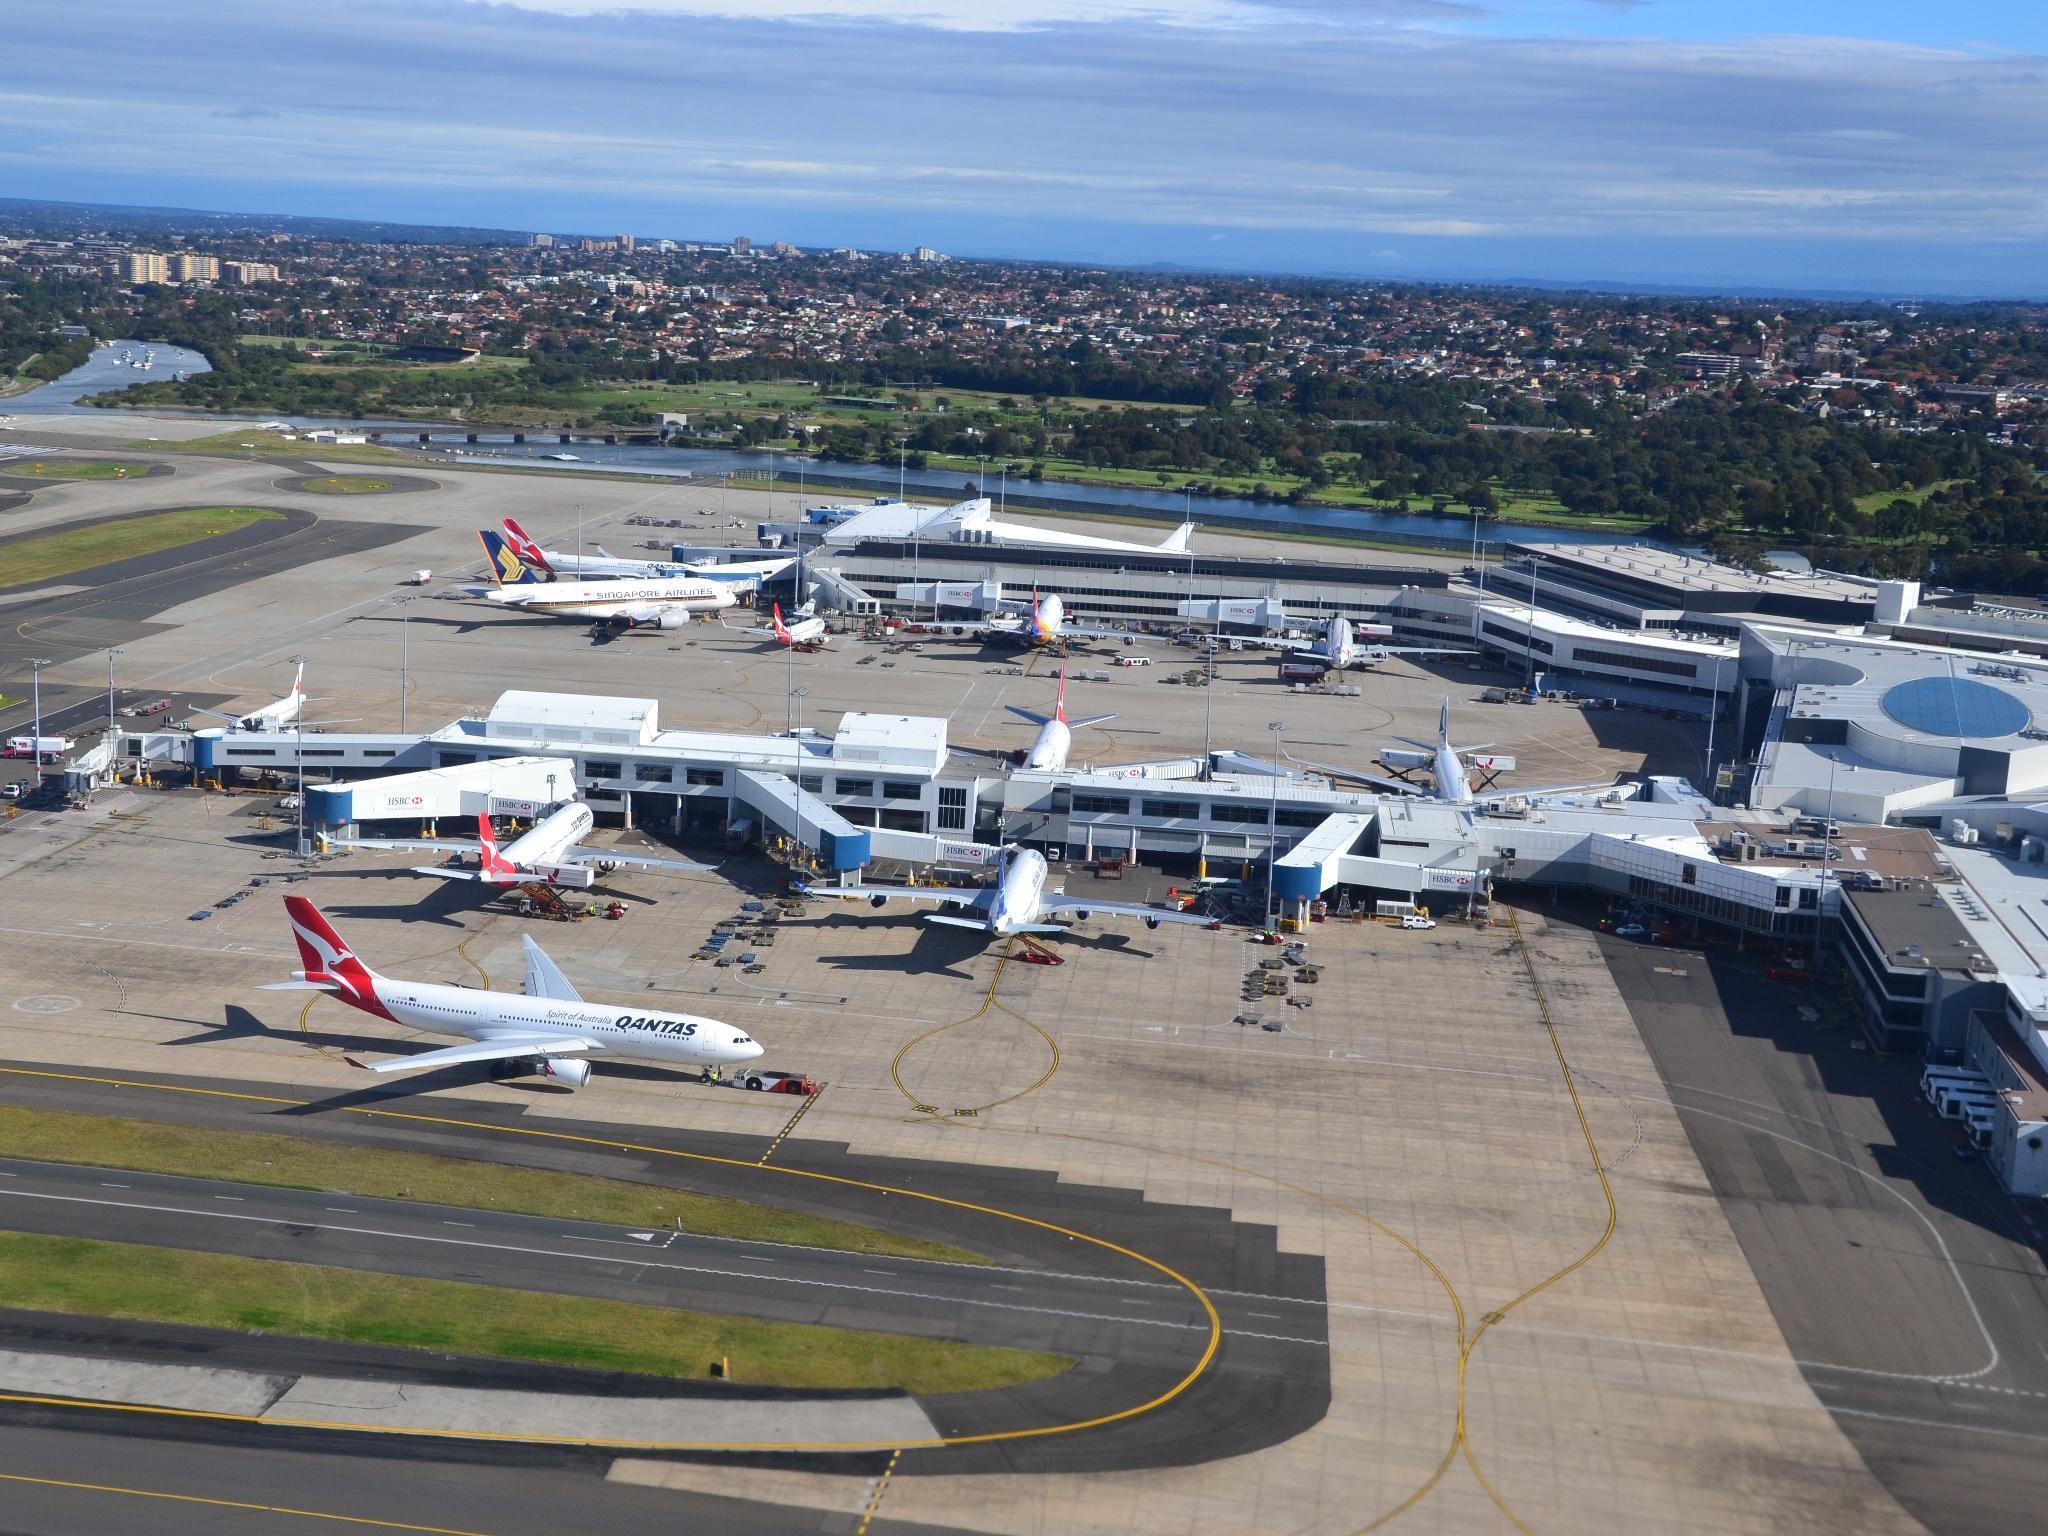 Sydney Airport. Passengers have been advised to arrive early and expect delays after the bomb plot was uncovered